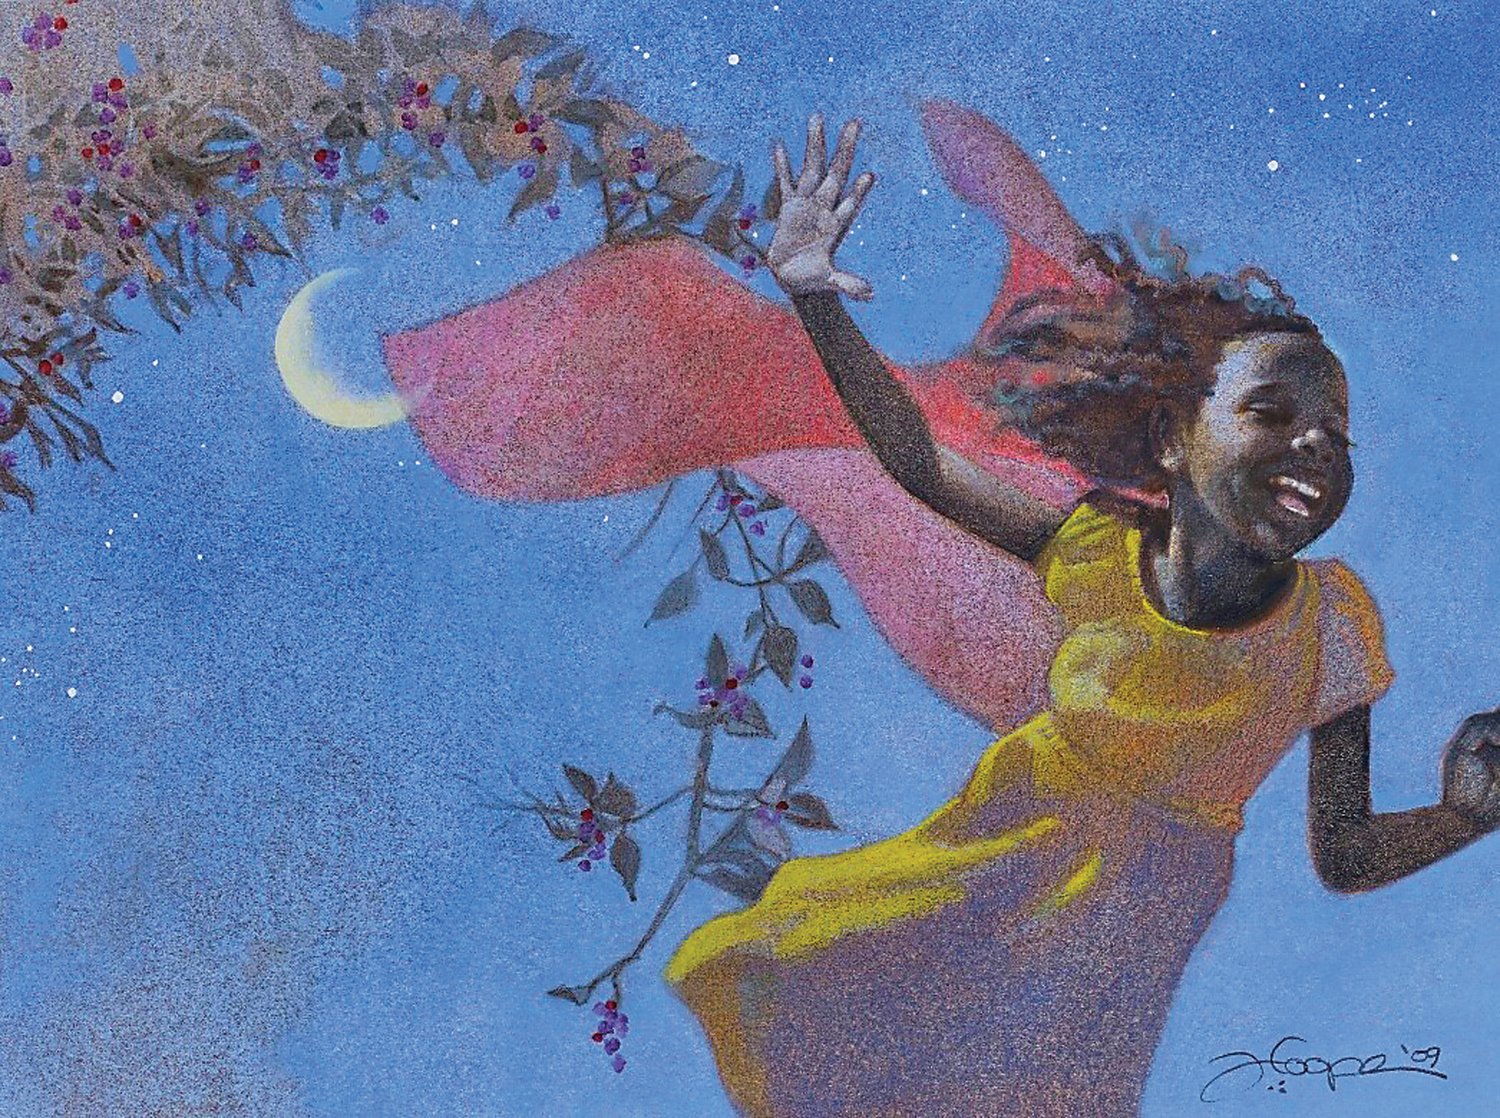 “Child with Moon,” an an oil wash on board, is an illustration by Floyd Cooper (1956-2001) from “The Blacker the Berry Poems,” by Joyce Carol Thomas. It was a gift of Deborah and Theodore Croll to the James A. Michener Art Museum in 2002.